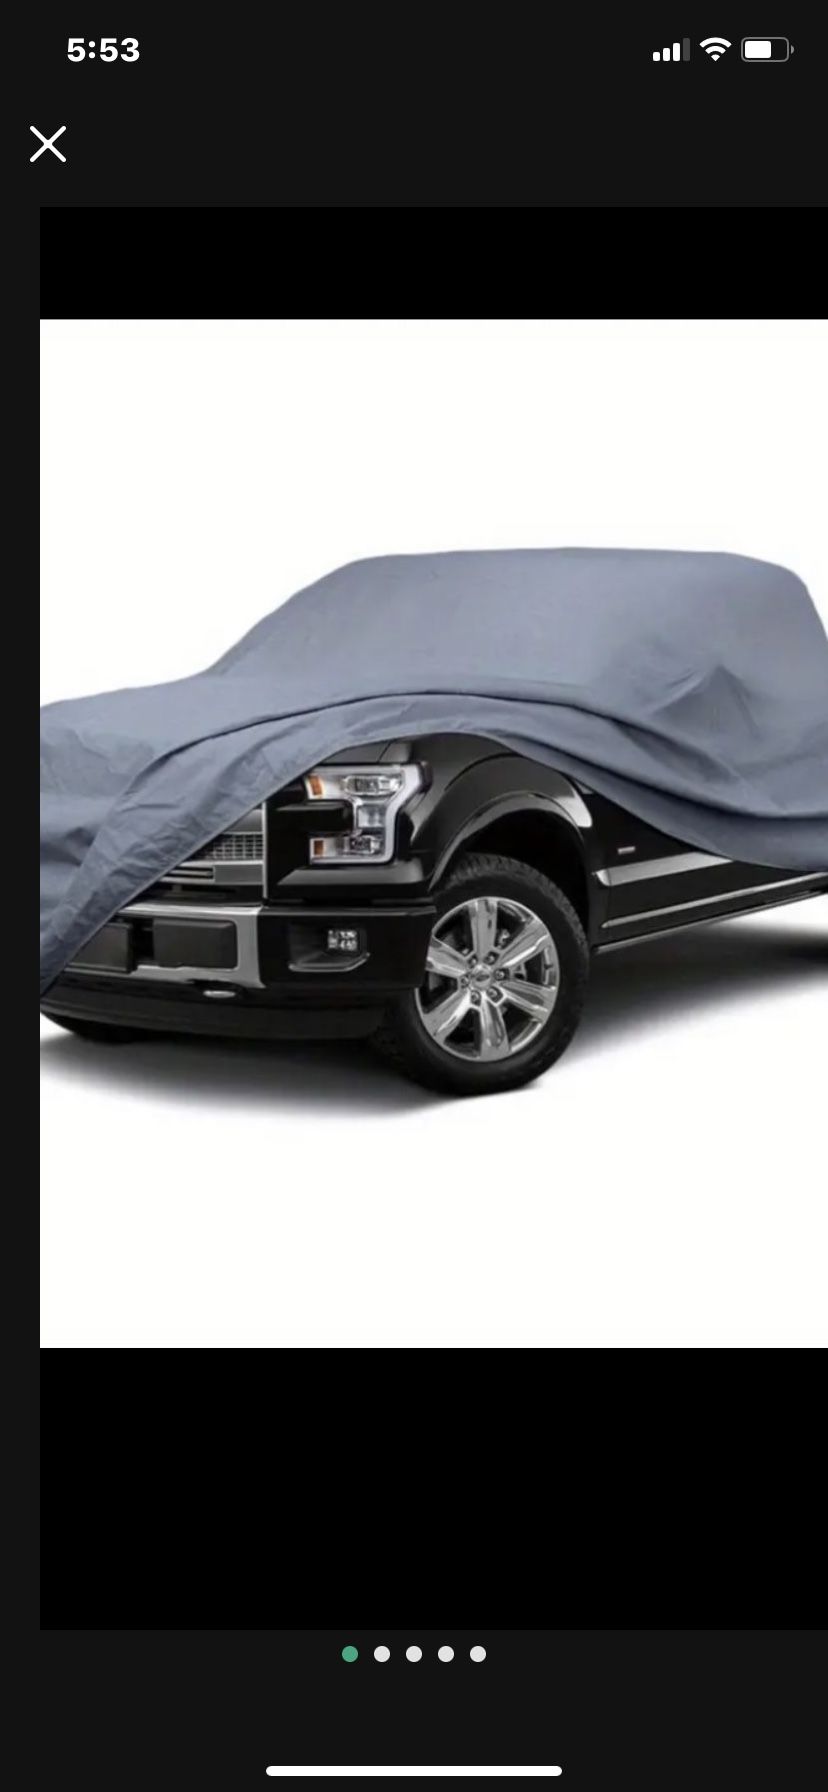 Waterproof Car And Truck Covers All Sizes $40-$50-$60-$70-$80/cubre Carros Contra Agua Todas Medidas 